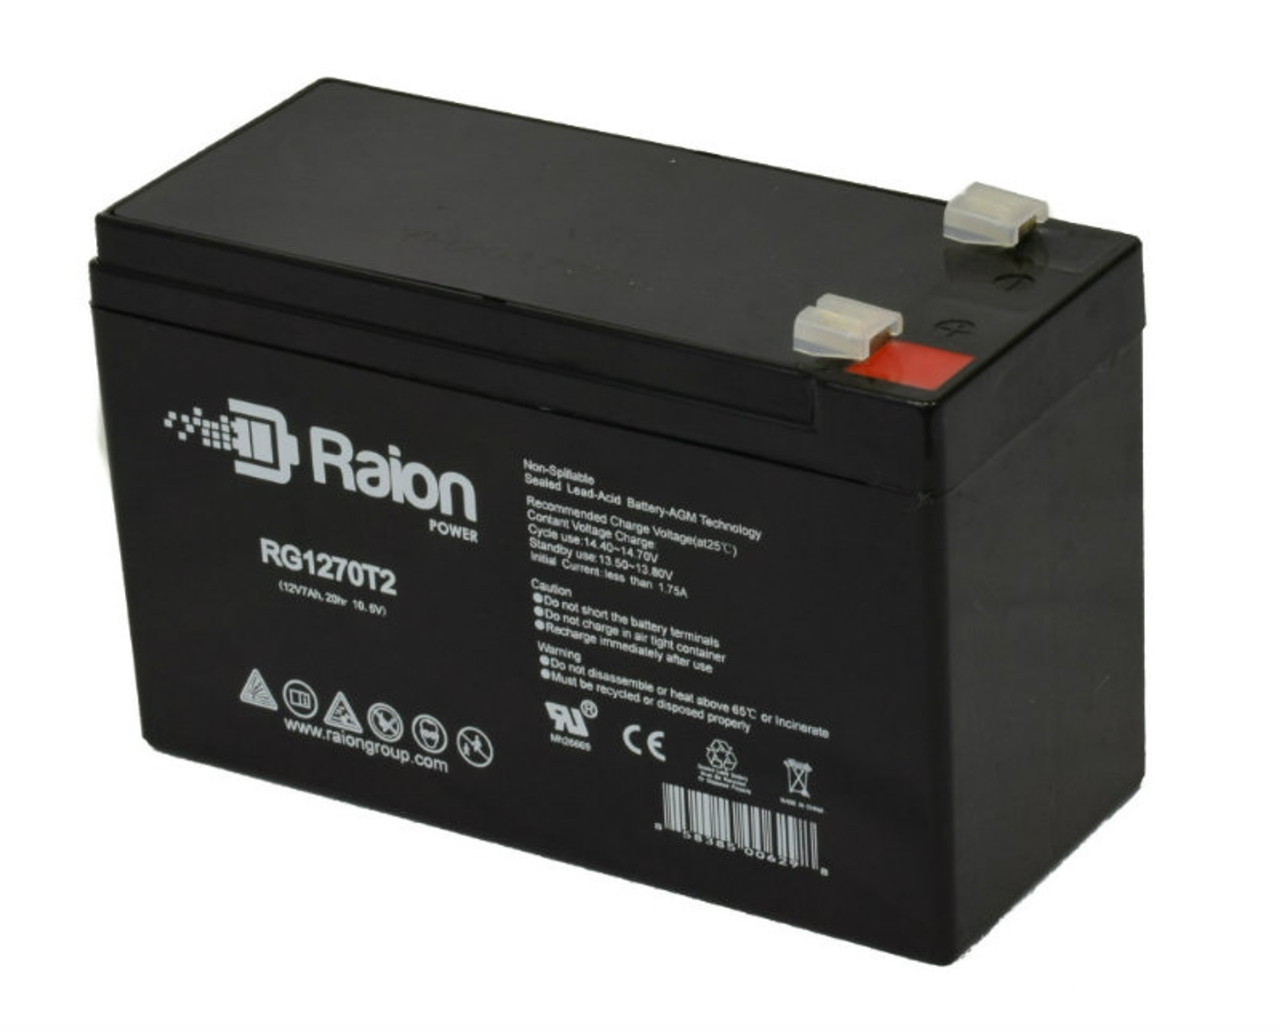 Raion Power RG1270T1 12V 7Ah Non-Spillable Replacement Battery for Power Patrol SLA1075